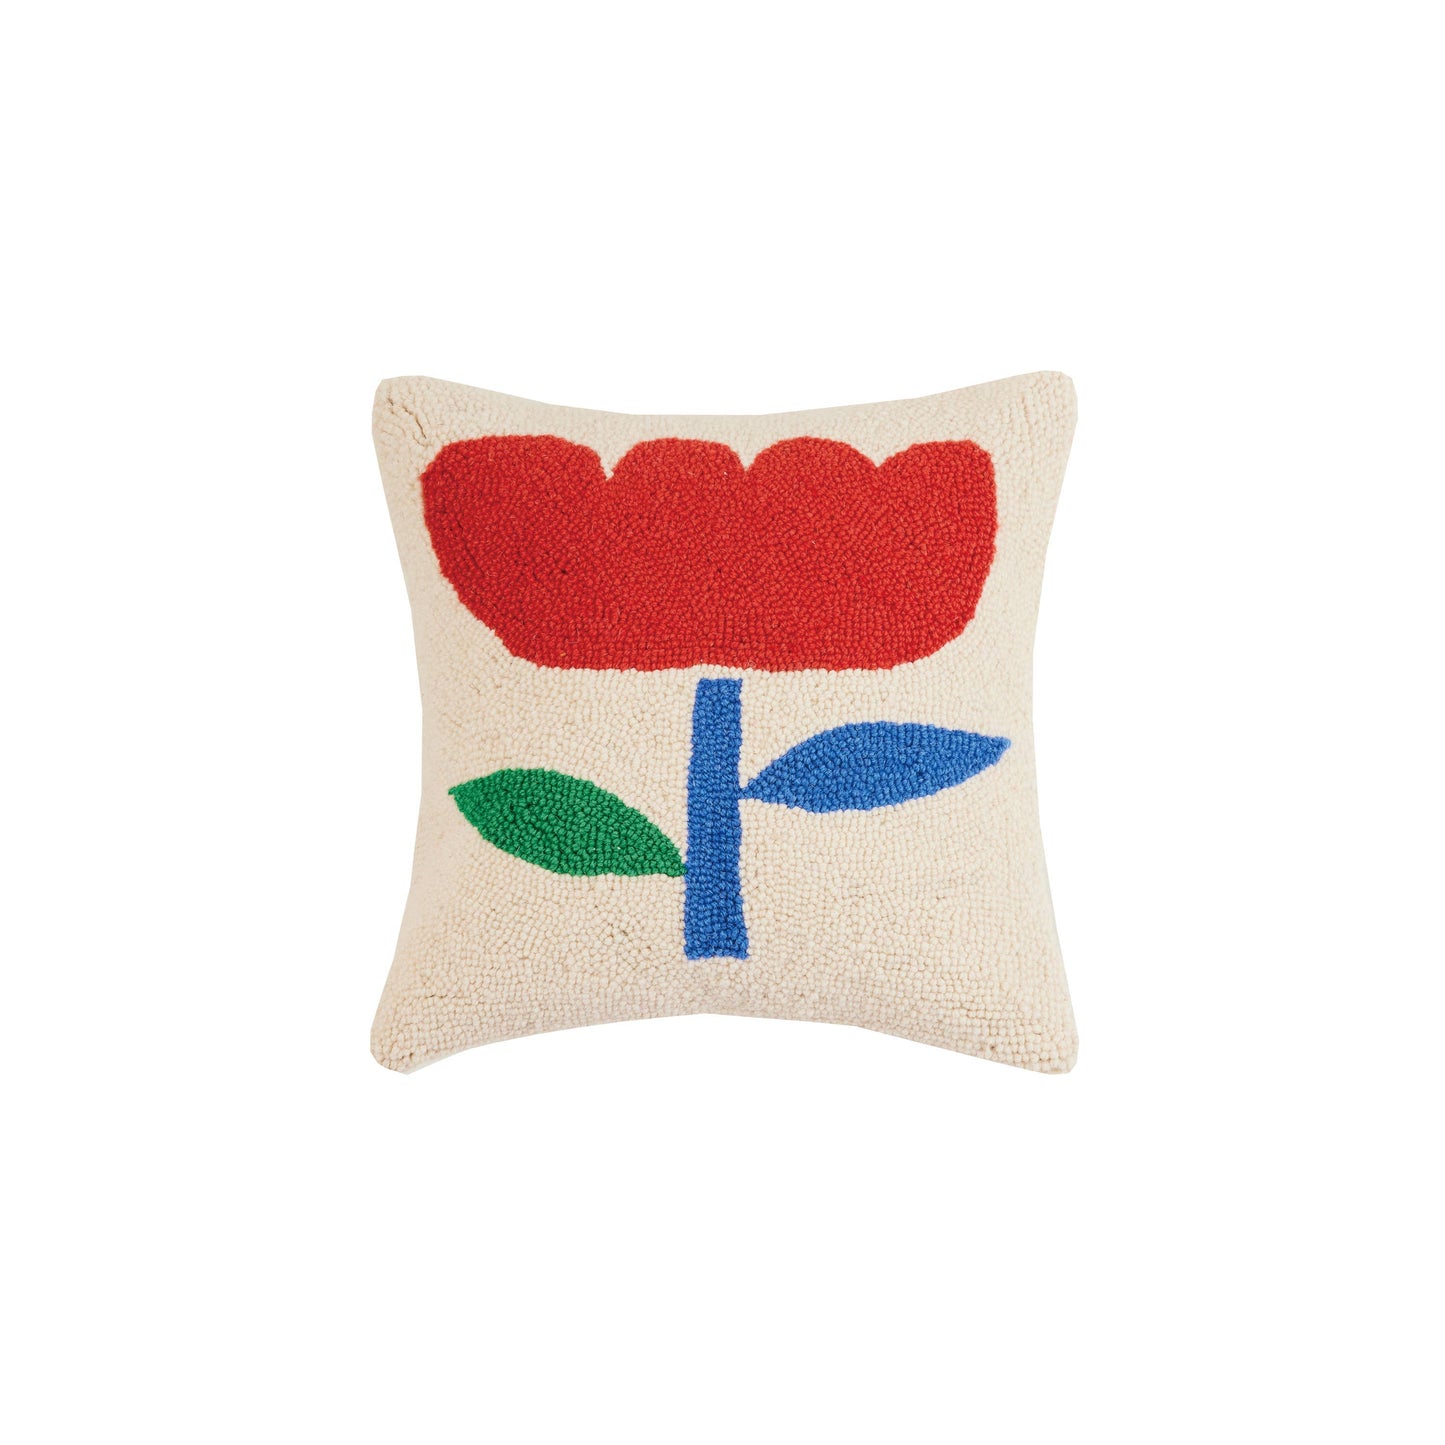 Rainbow Flower Hook Pillow by Ampersand